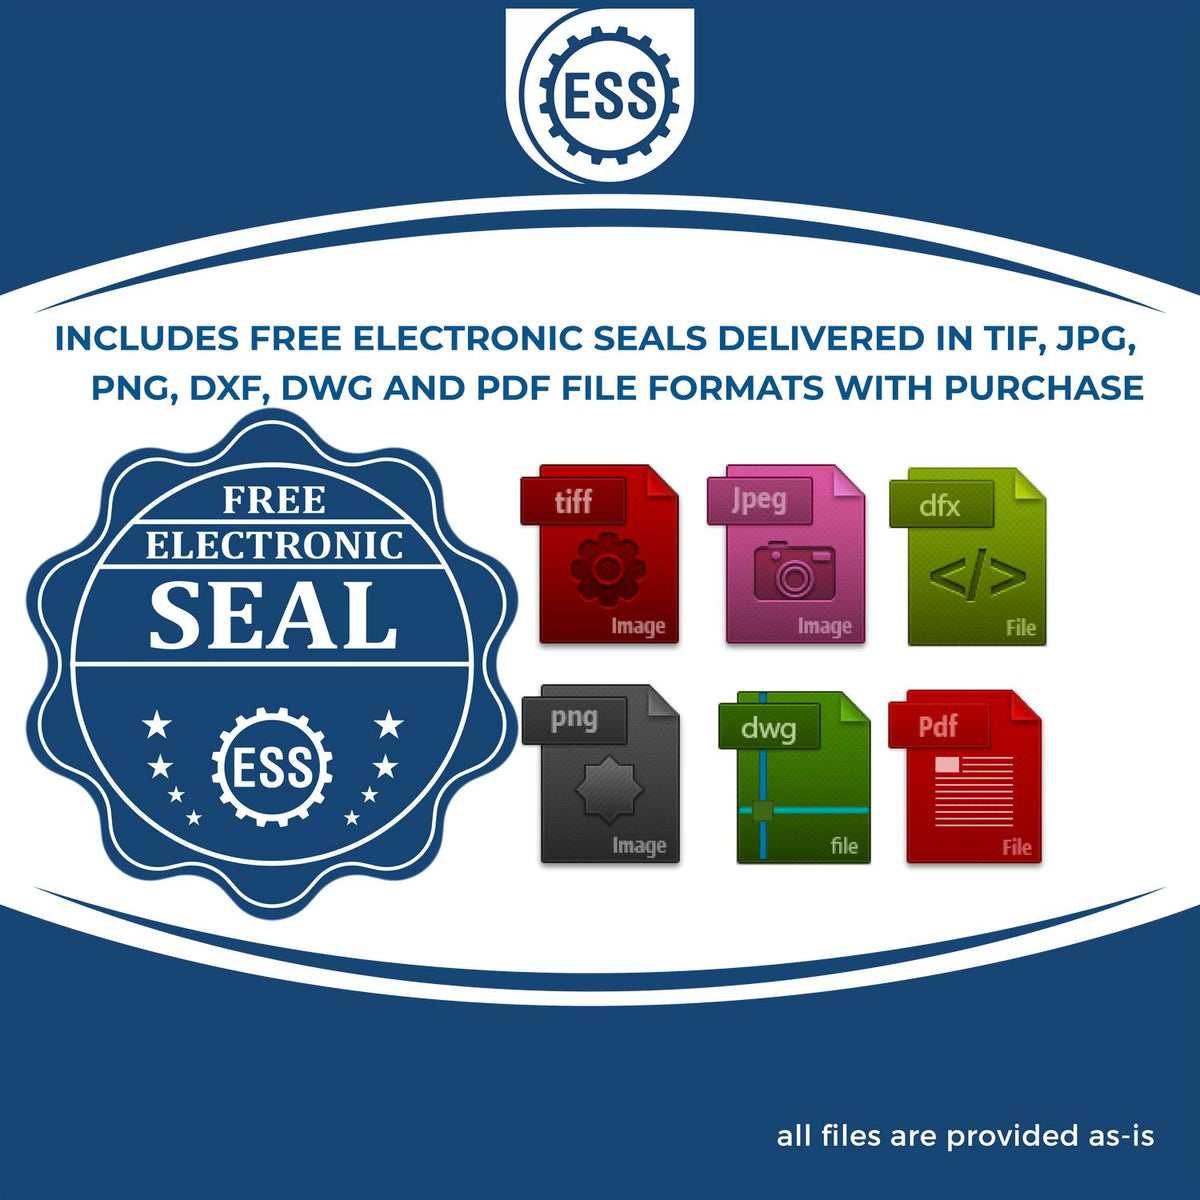 An infographic for the free electronic seal for the Hybrid Wyoming Geologist Seal illustrating the different file type icons such as DXF, DWG, TIF, JPG and PNG.